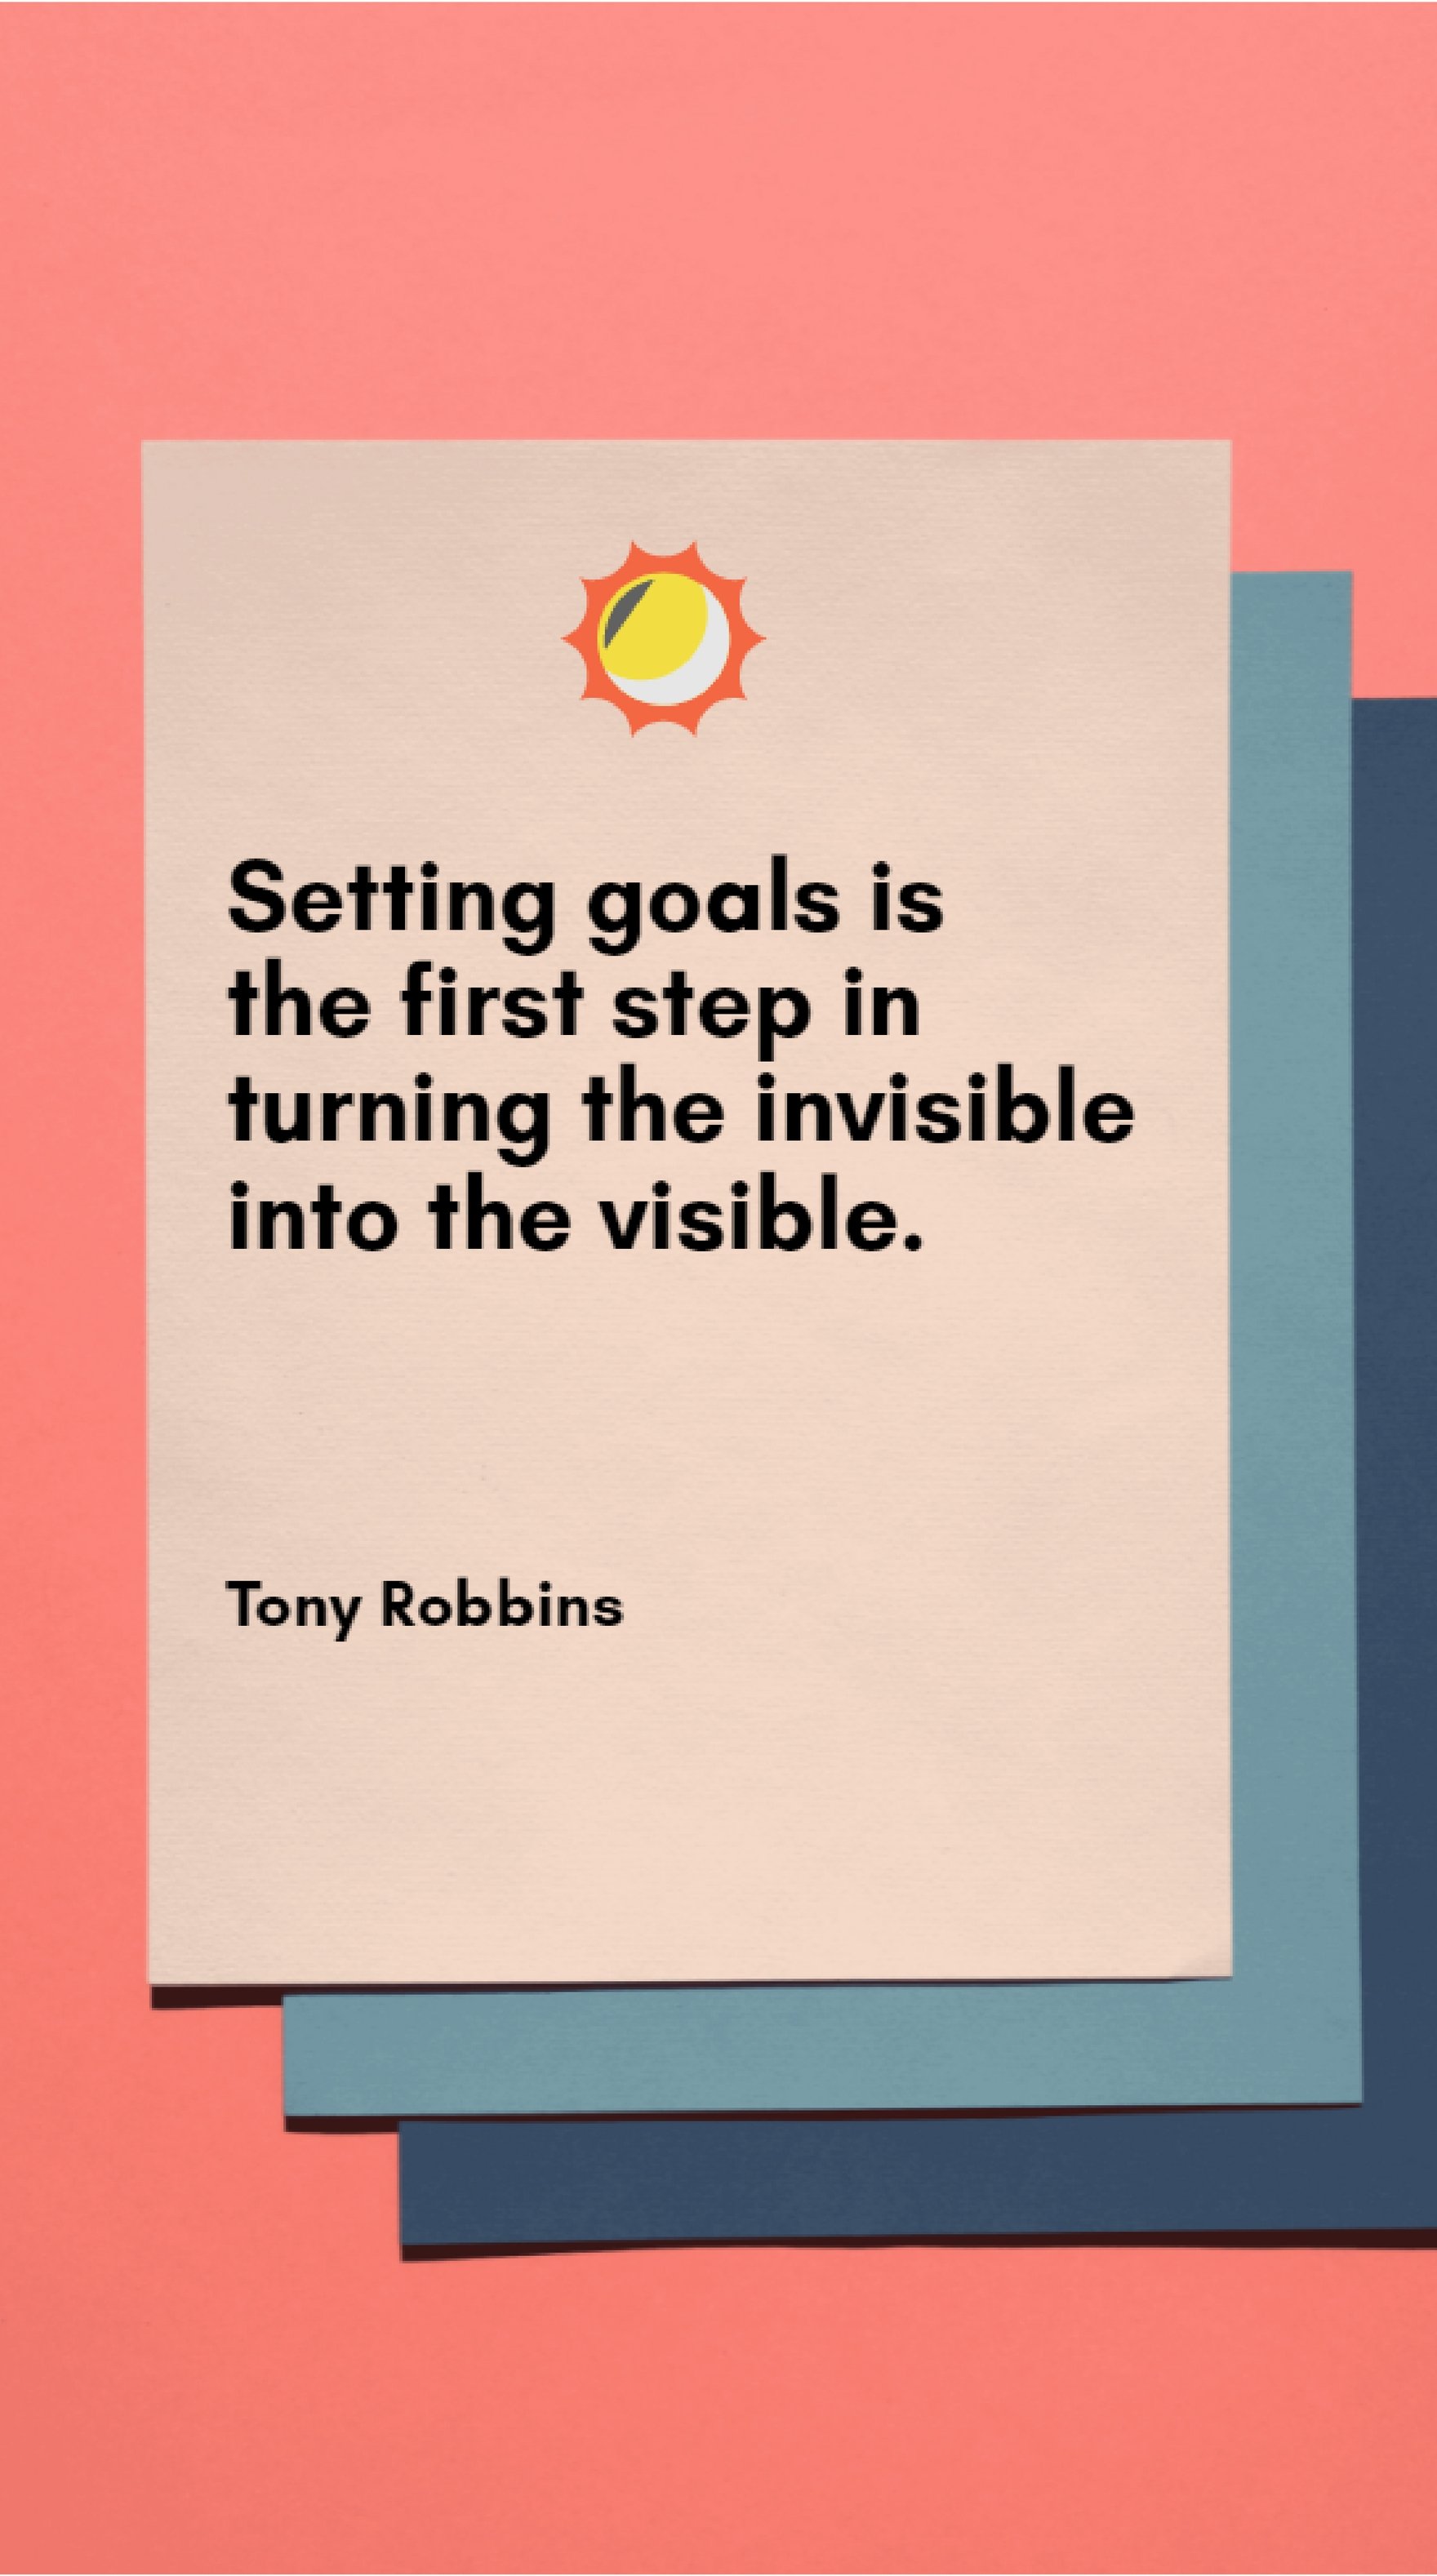 Tony Robbins - Setting goals is the first step in turning the invisible into the visible.